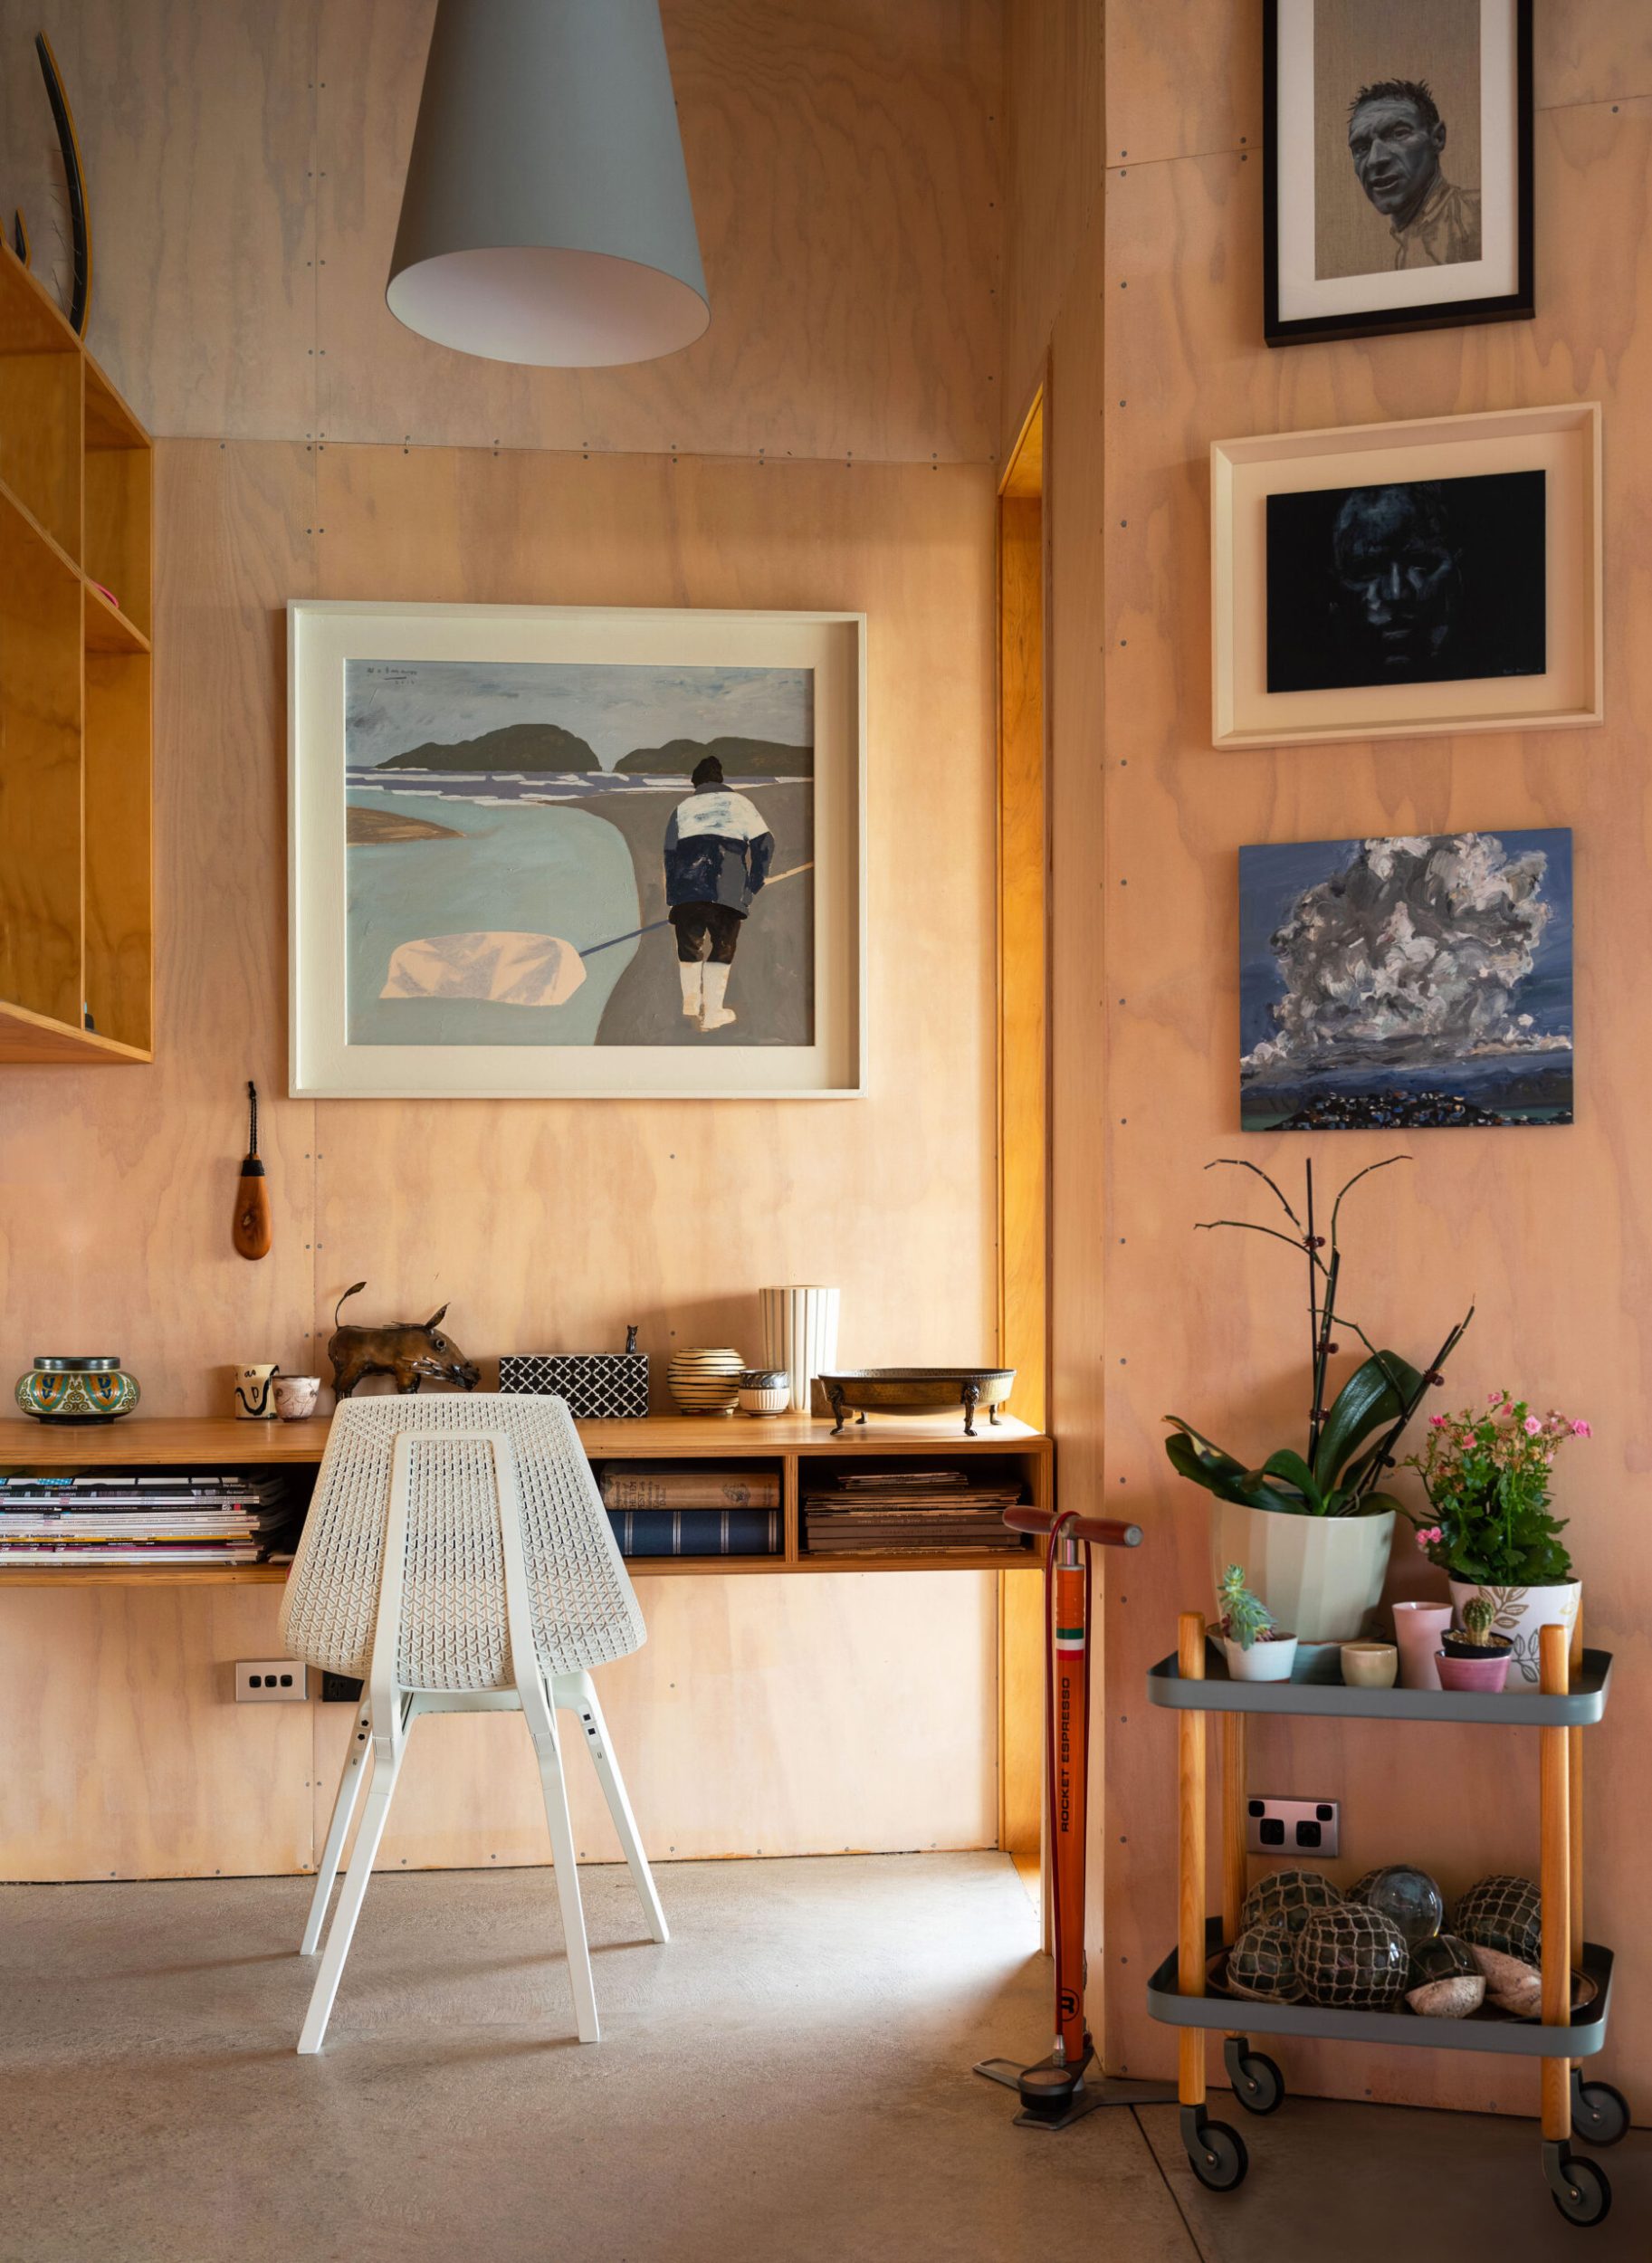 Art that depicts a whitebaiter above a plywood desk